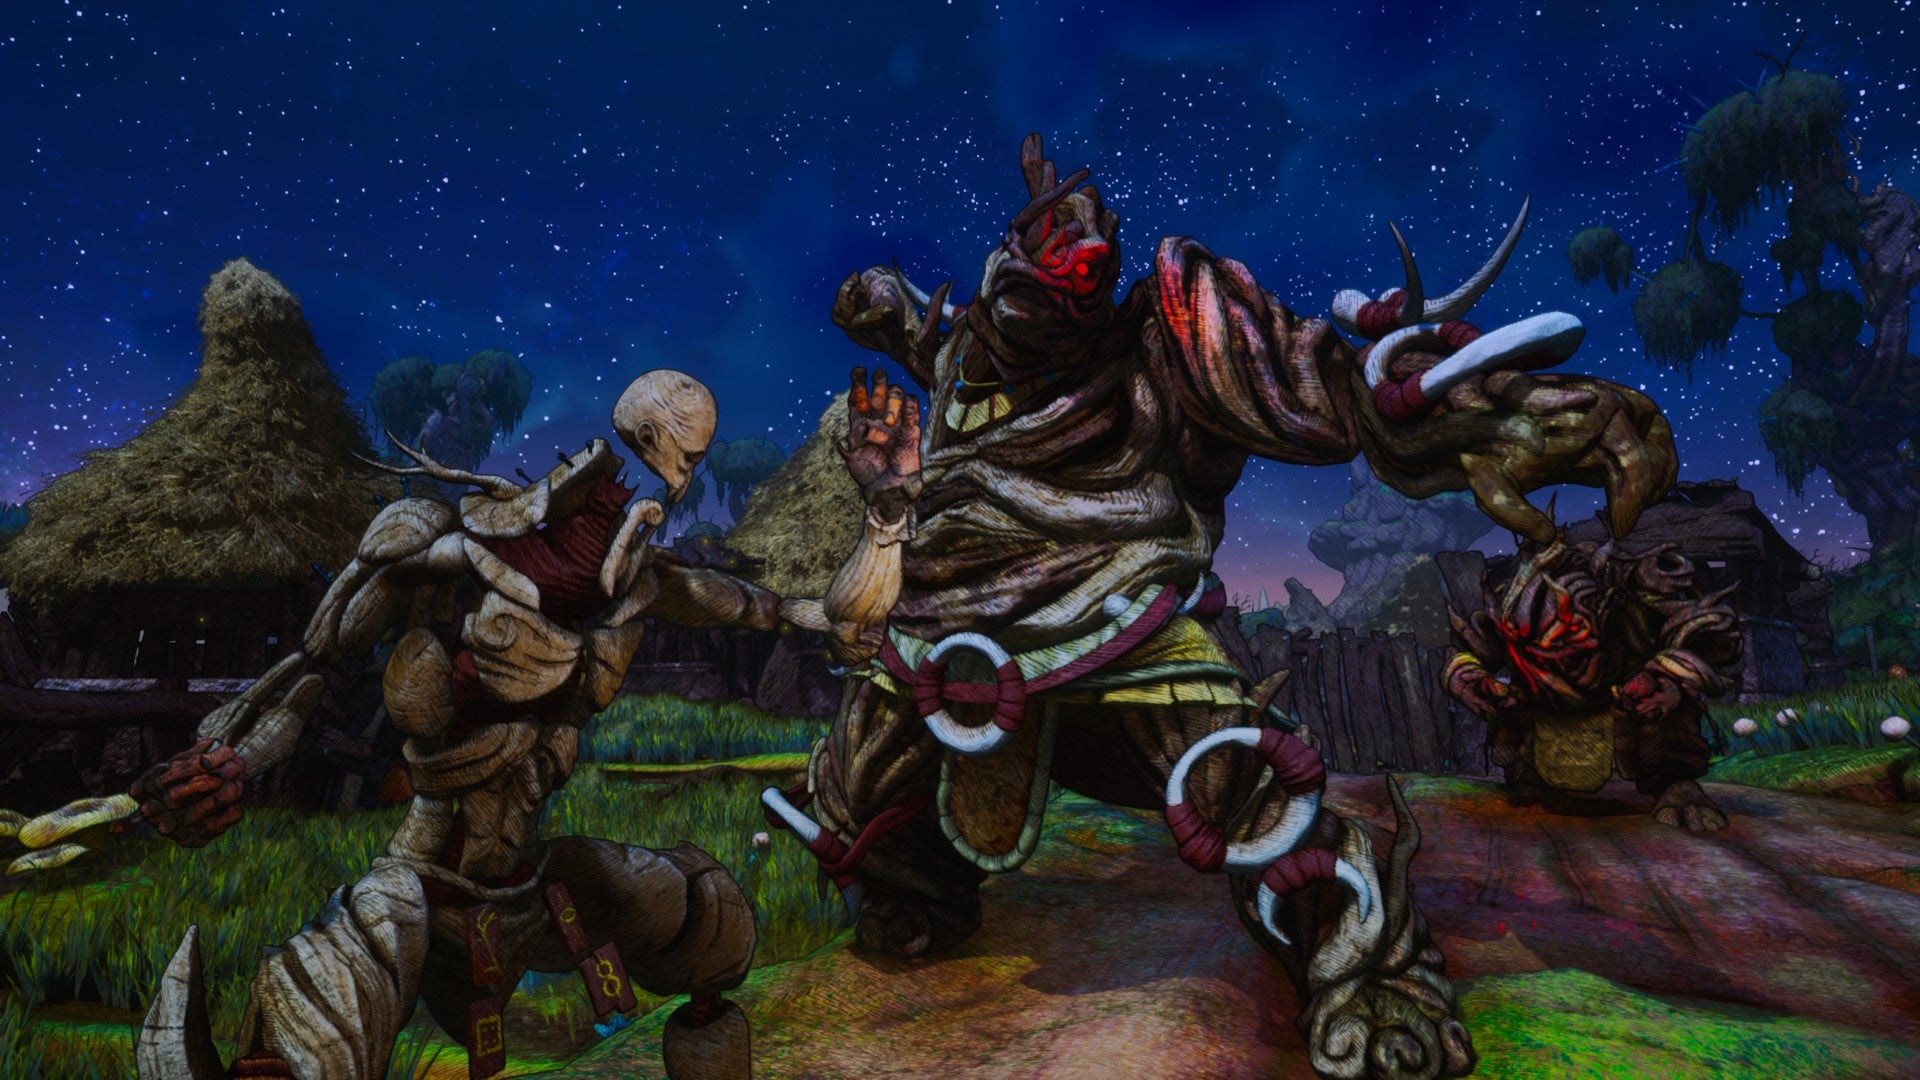 A screenshot from Clash: Artifacts Of Chaos that shows Pseudo (locked in wood) battling a demonic great foe at night.